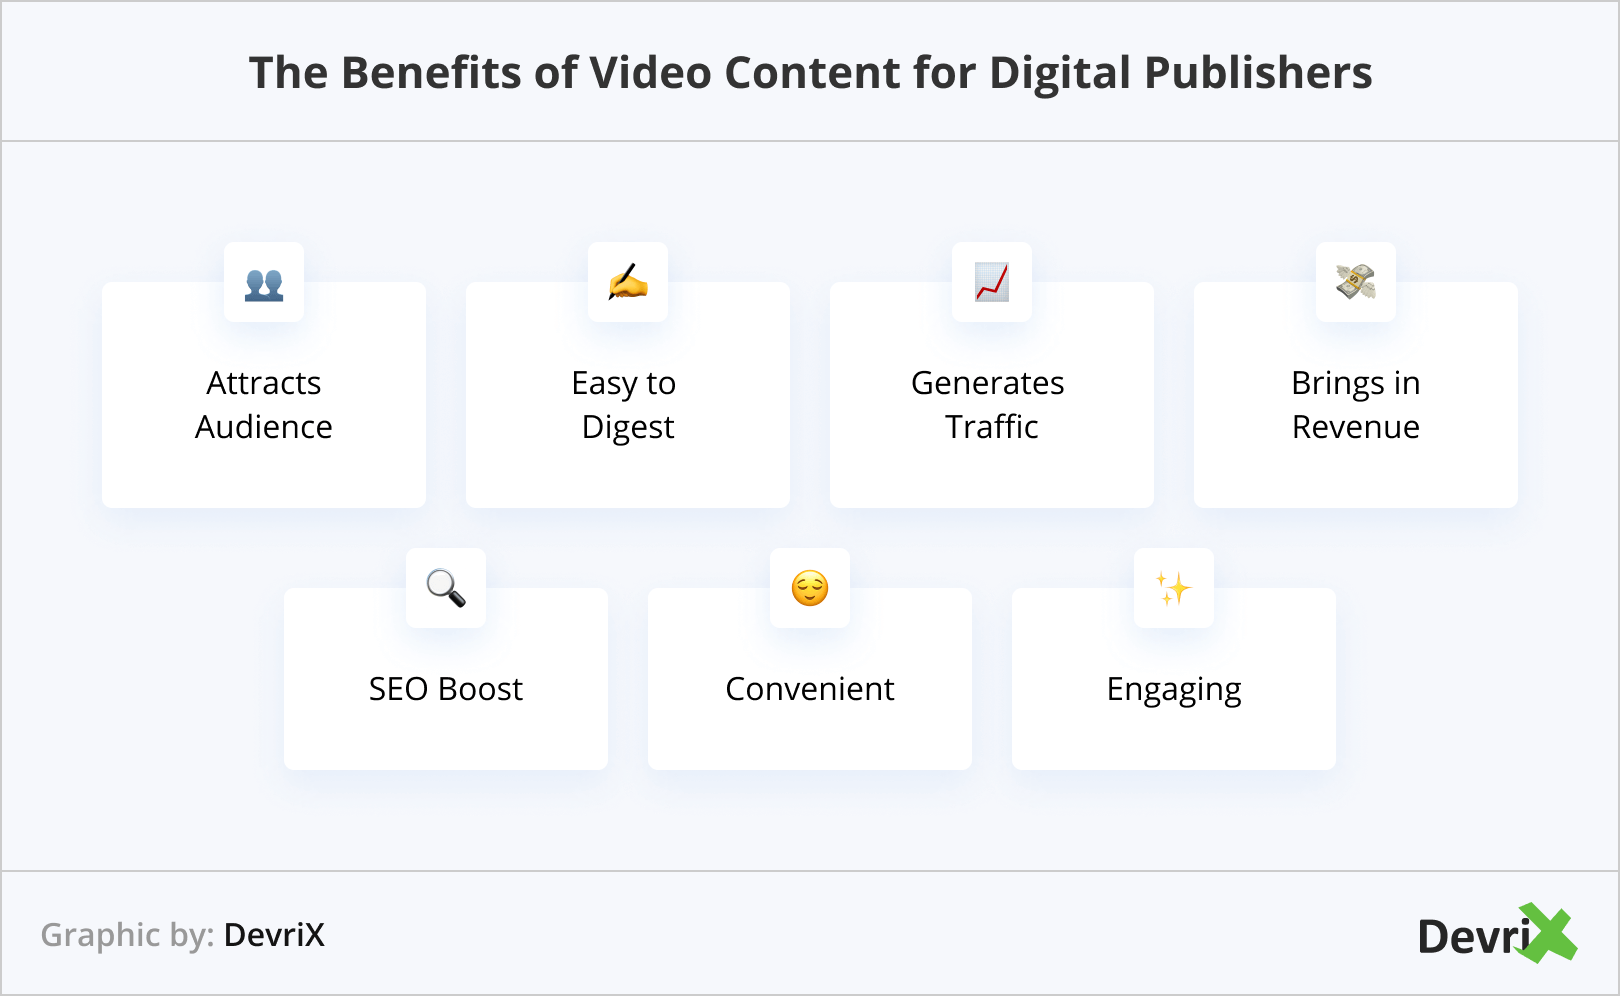 The Benefits of Video Content for Digital Publishers